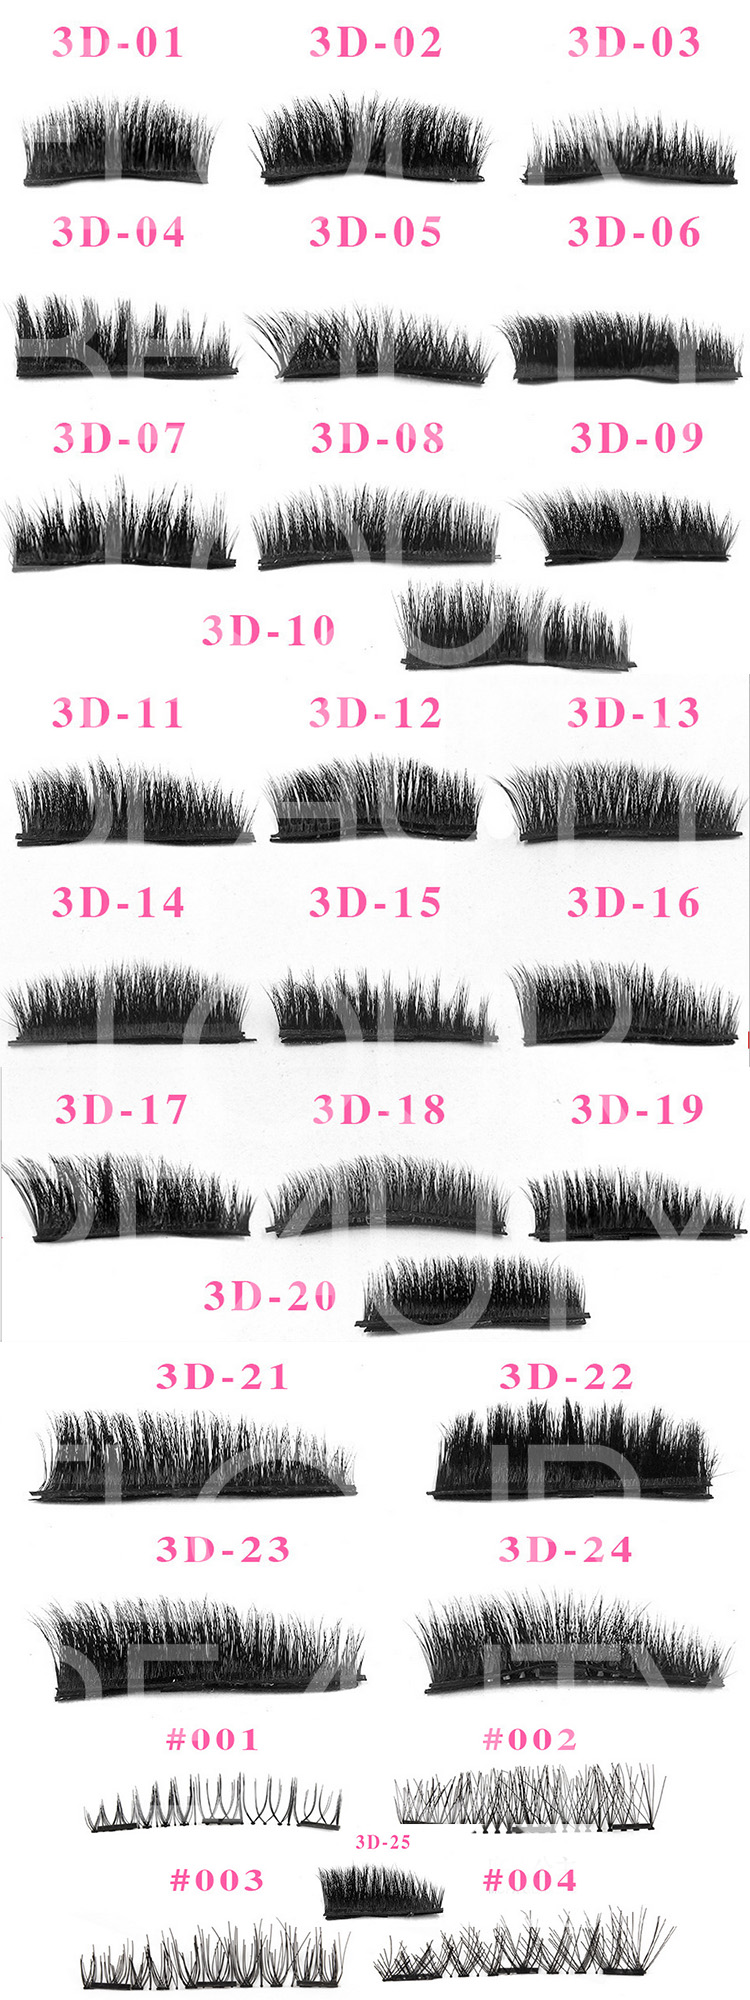 many different kinds of triple magnets eyelashes wholesale.jpg